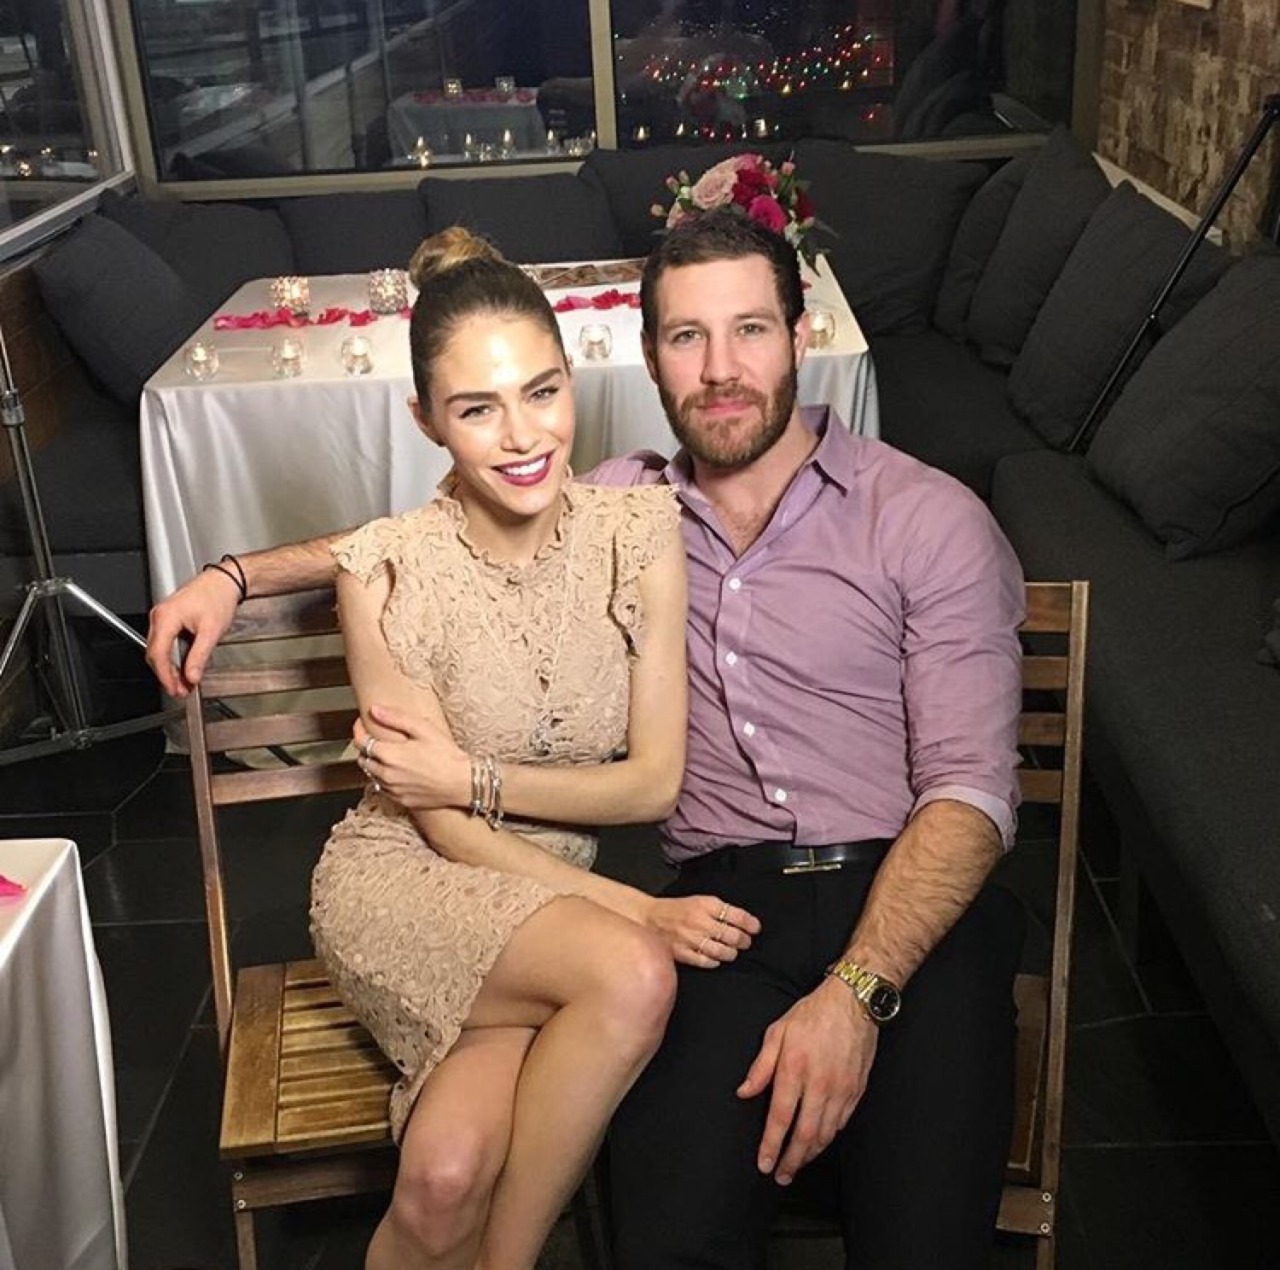 Wives and Girlfriends of NHL players — Jimmy Hayes & Kristen Valente